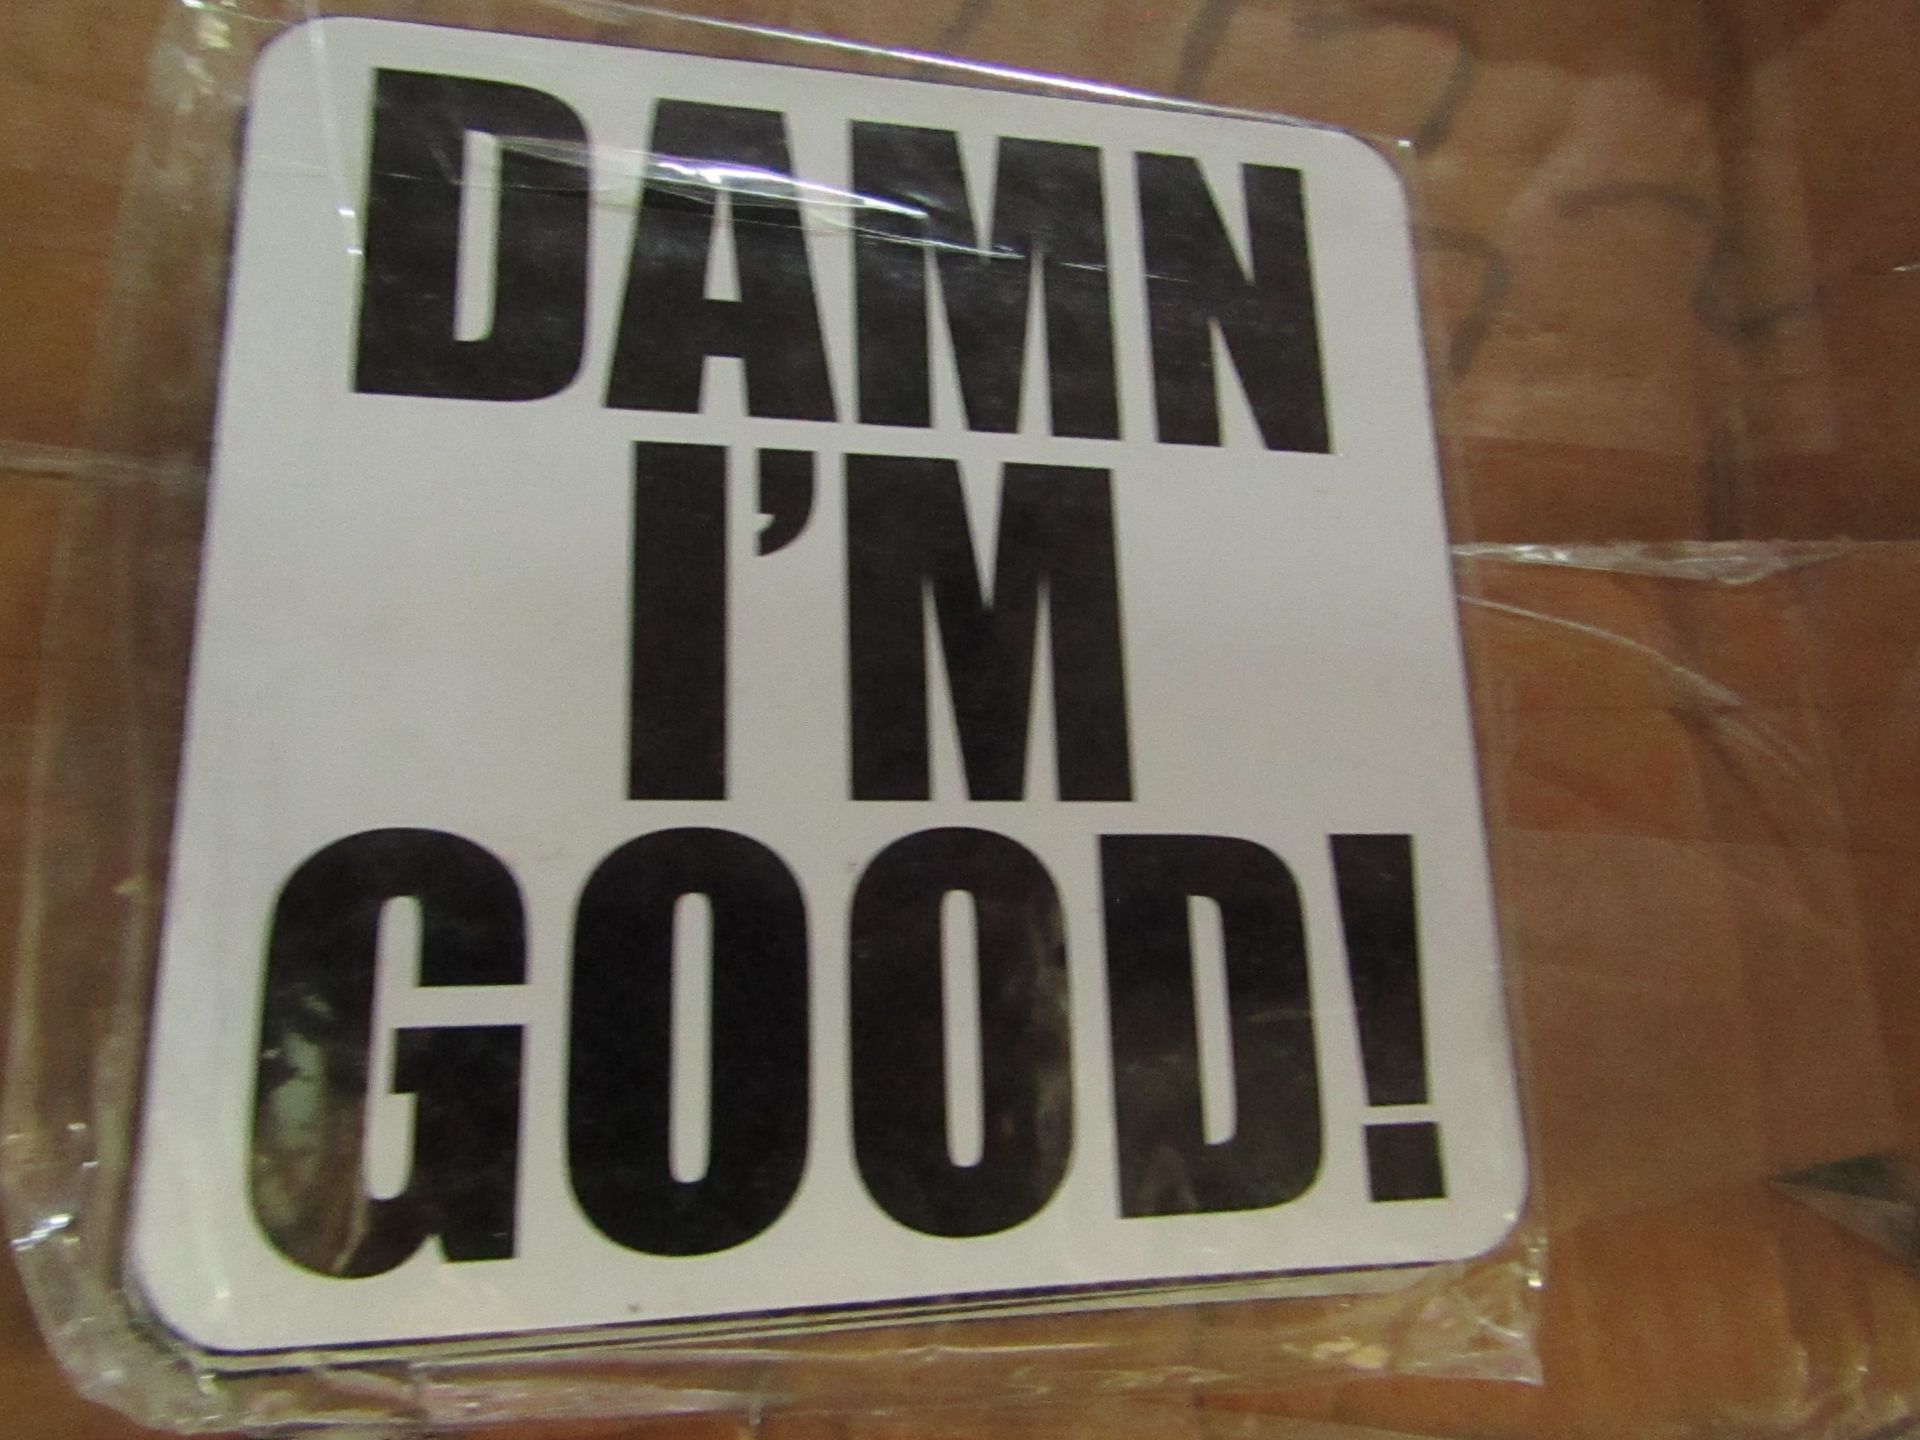 5x Packs Being : Spencer & Fleetwood - " DAMN I'M GOOD! " Branded Coaster Sets ( 6 Coasters Per Pack